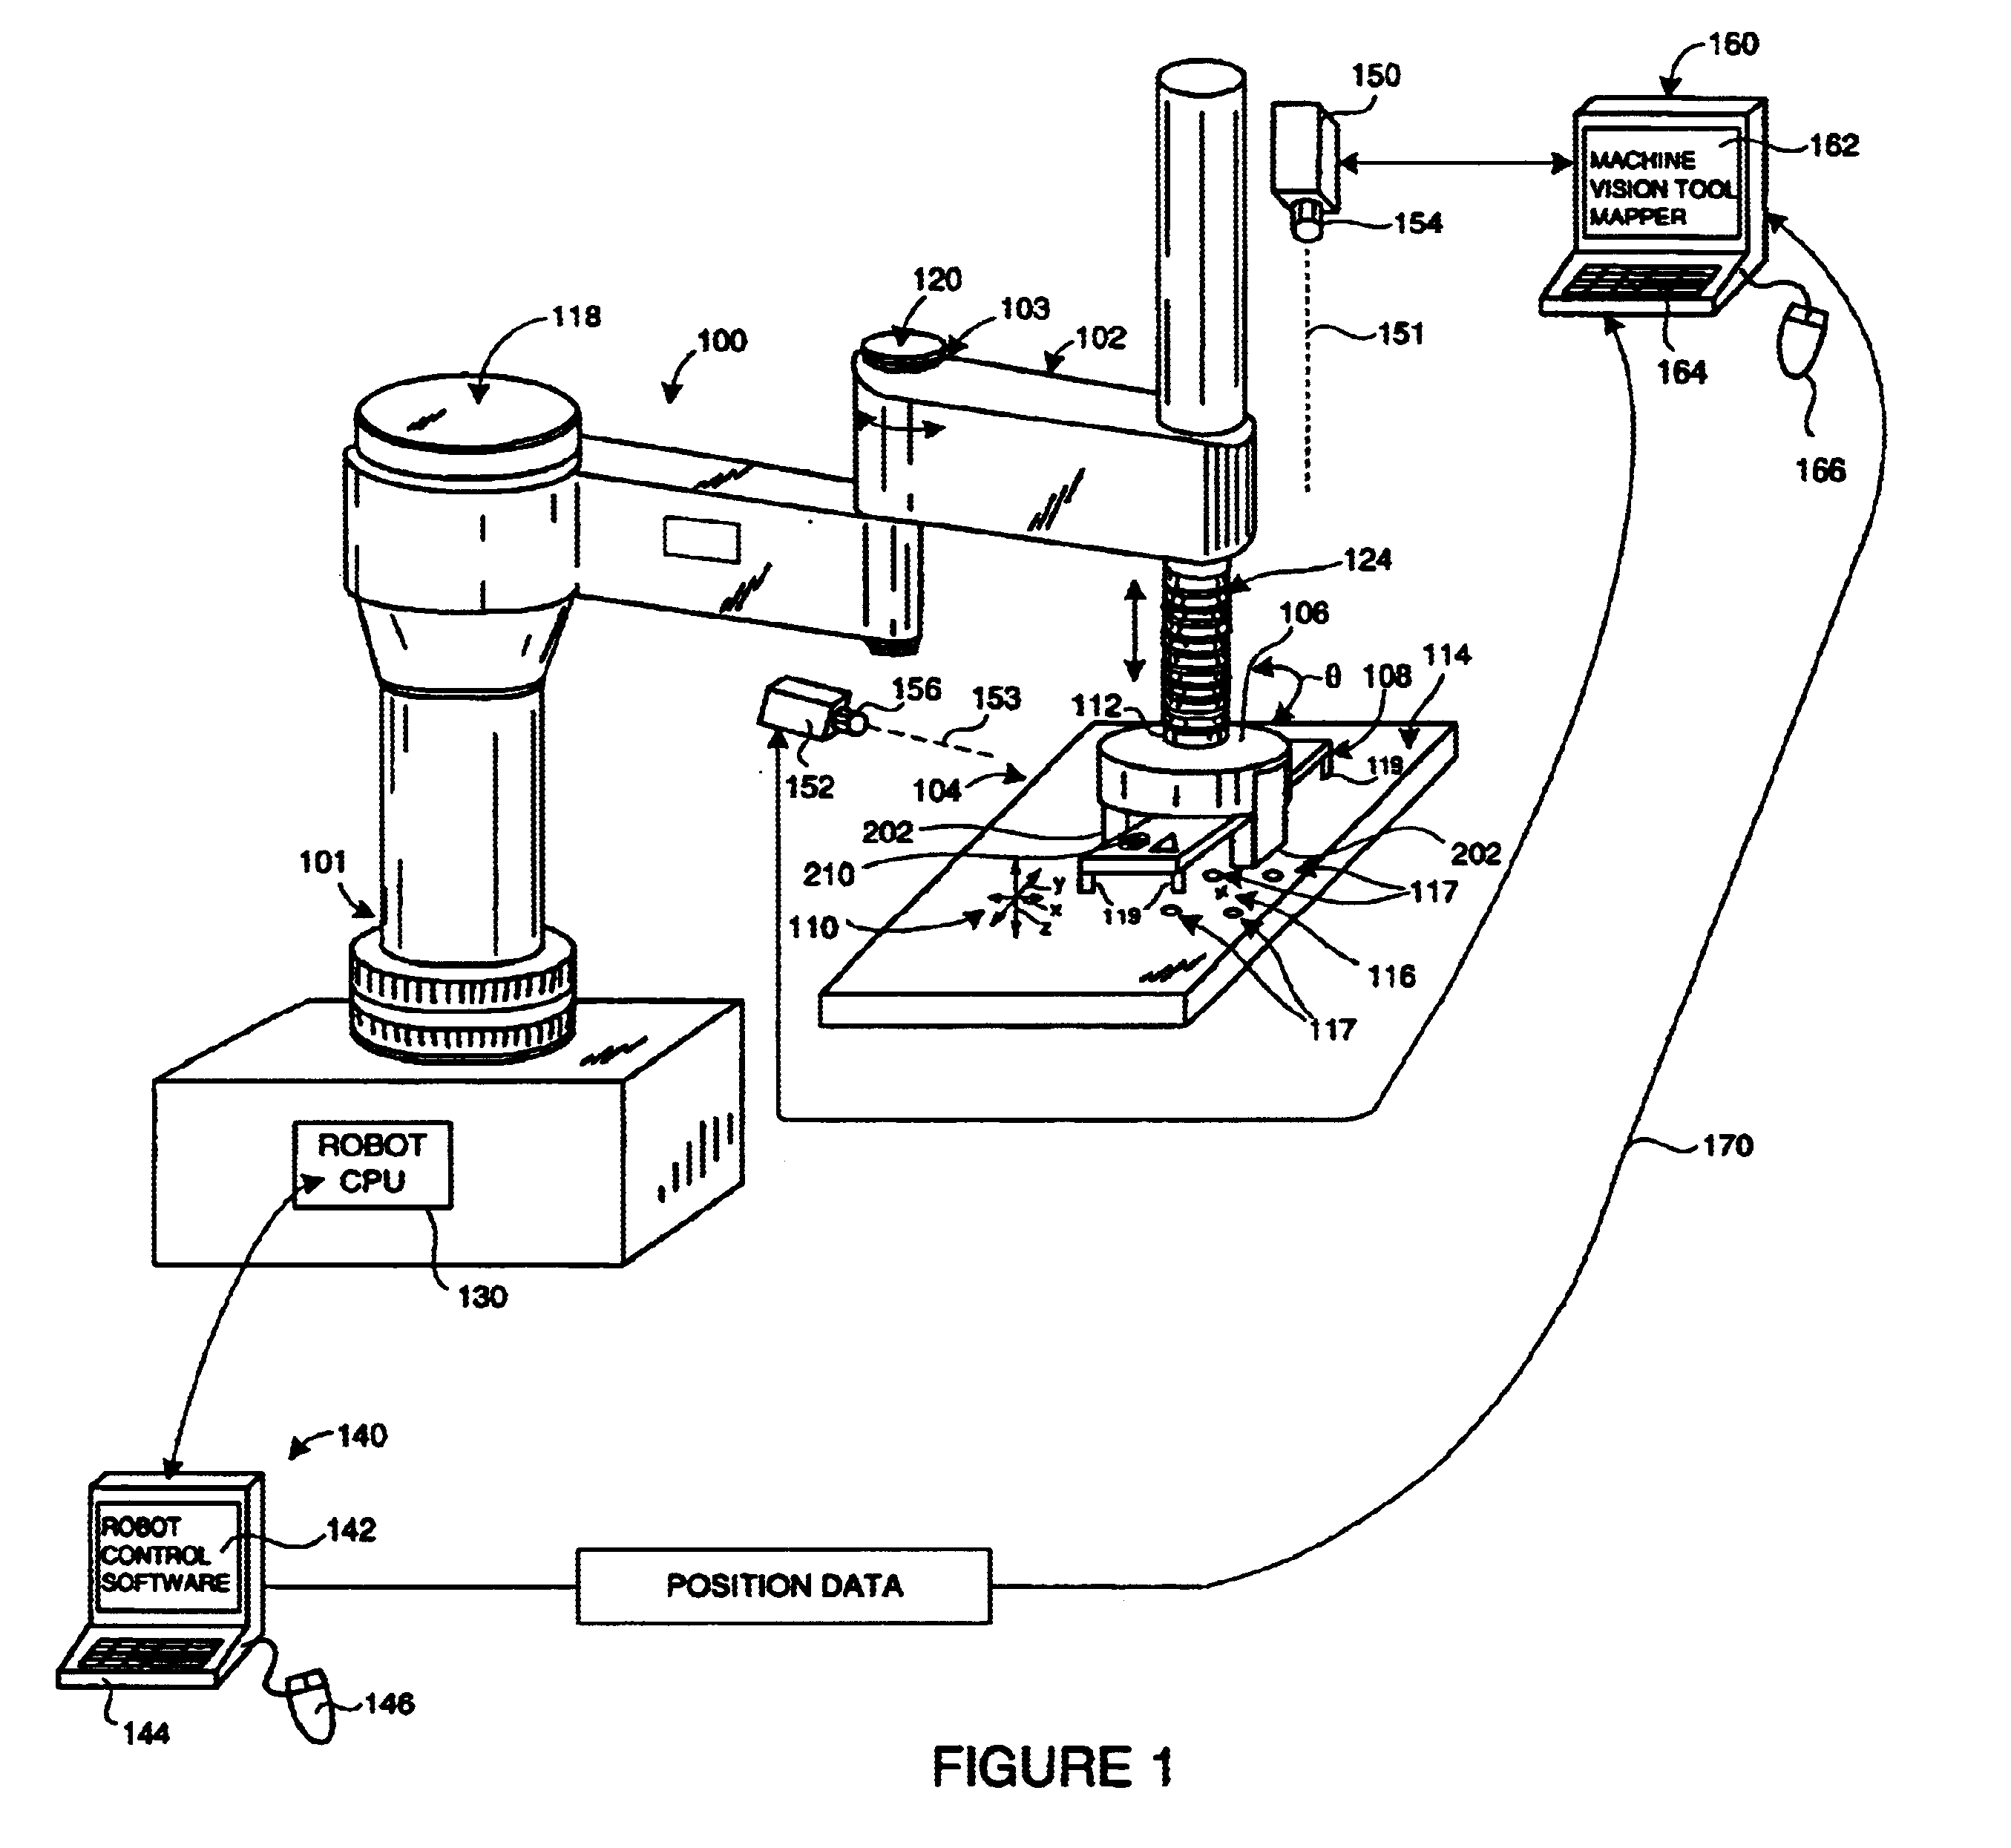 System and method for servoing robots based upon workpieces with fiducial marks using machine vision